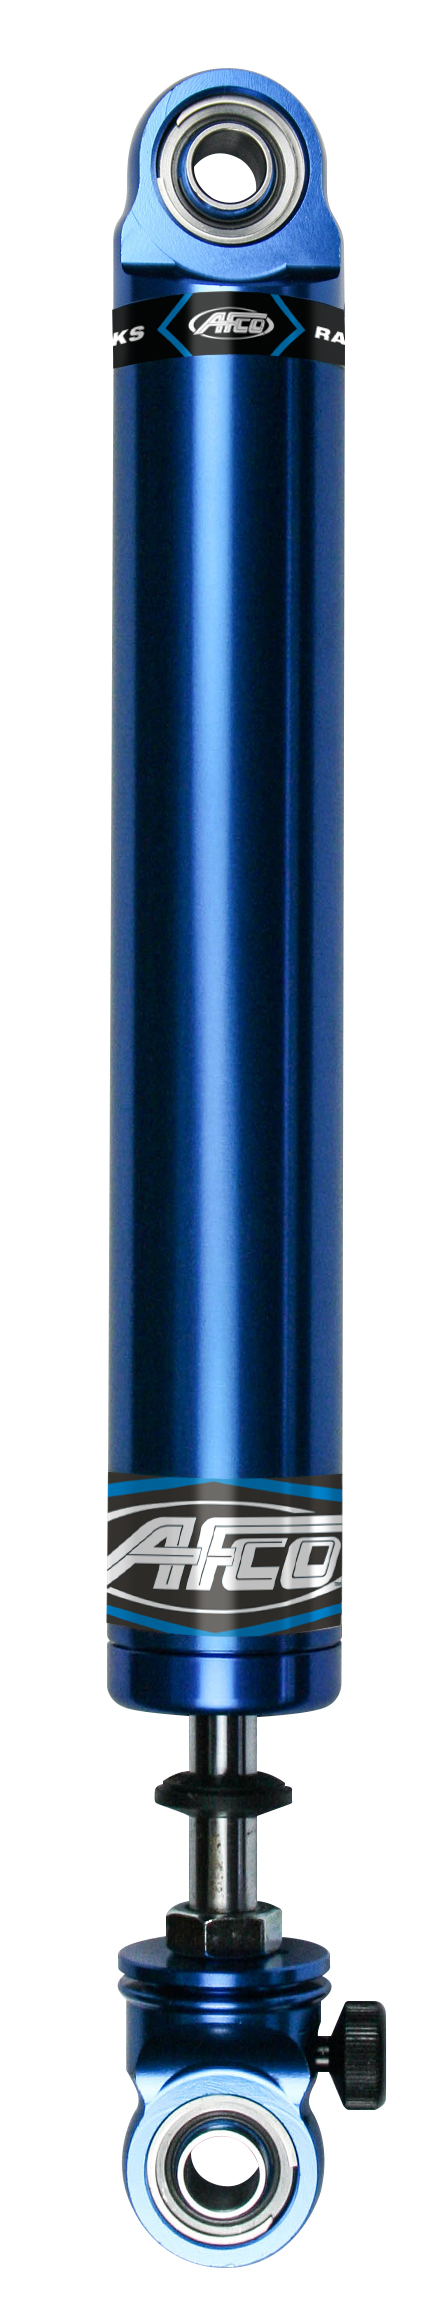 Aluminum Shock Twin Tube 16 Series Small Body 7 Inch Comp 2/Reb 3-6 Smooth